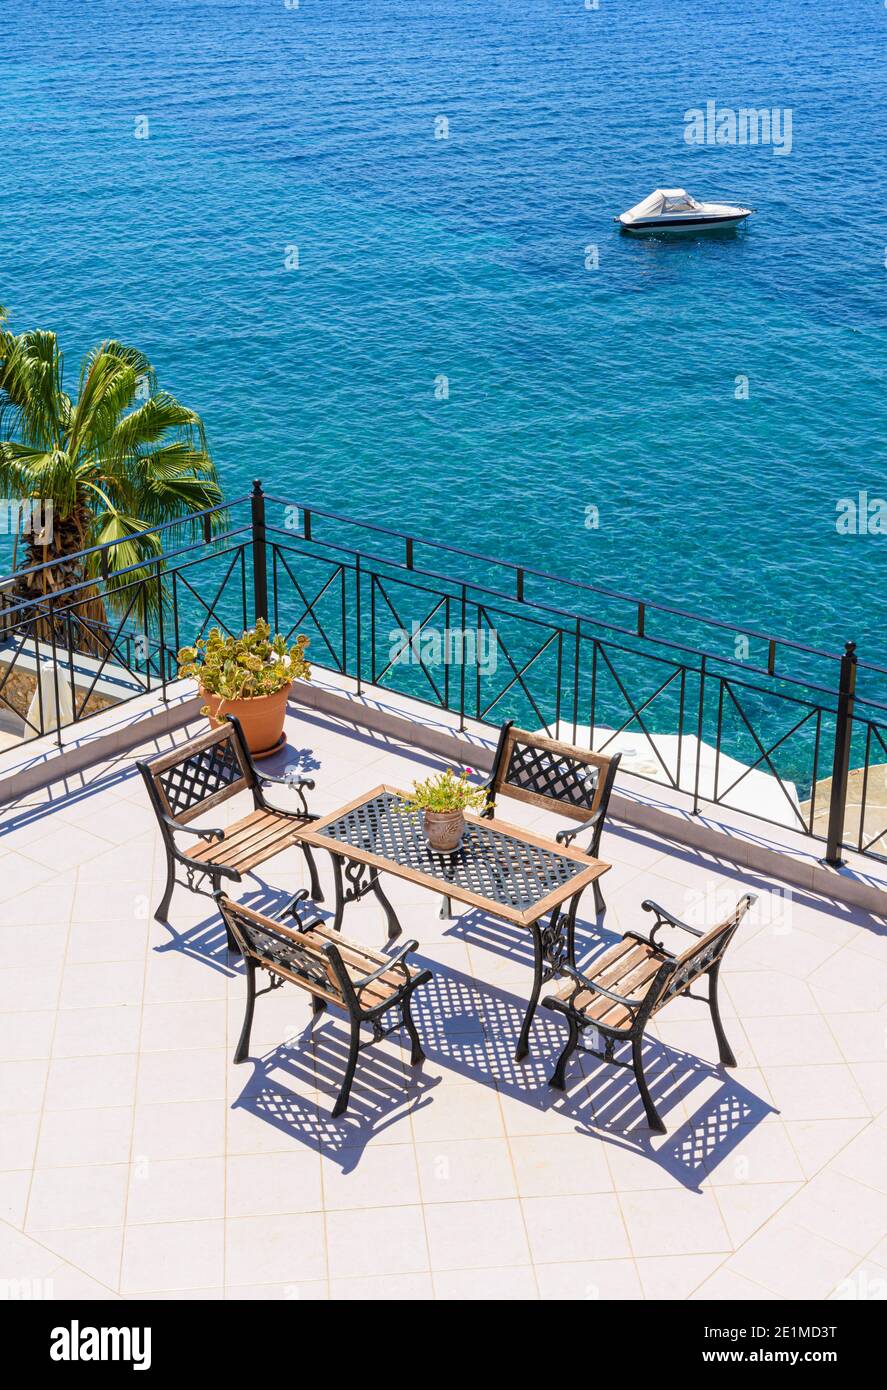 View of the Aegean Sea over table and chairs on a balcony in the holiday resort town of Masouri, Kalymnos, Dodecanese, Greece Stock Photo